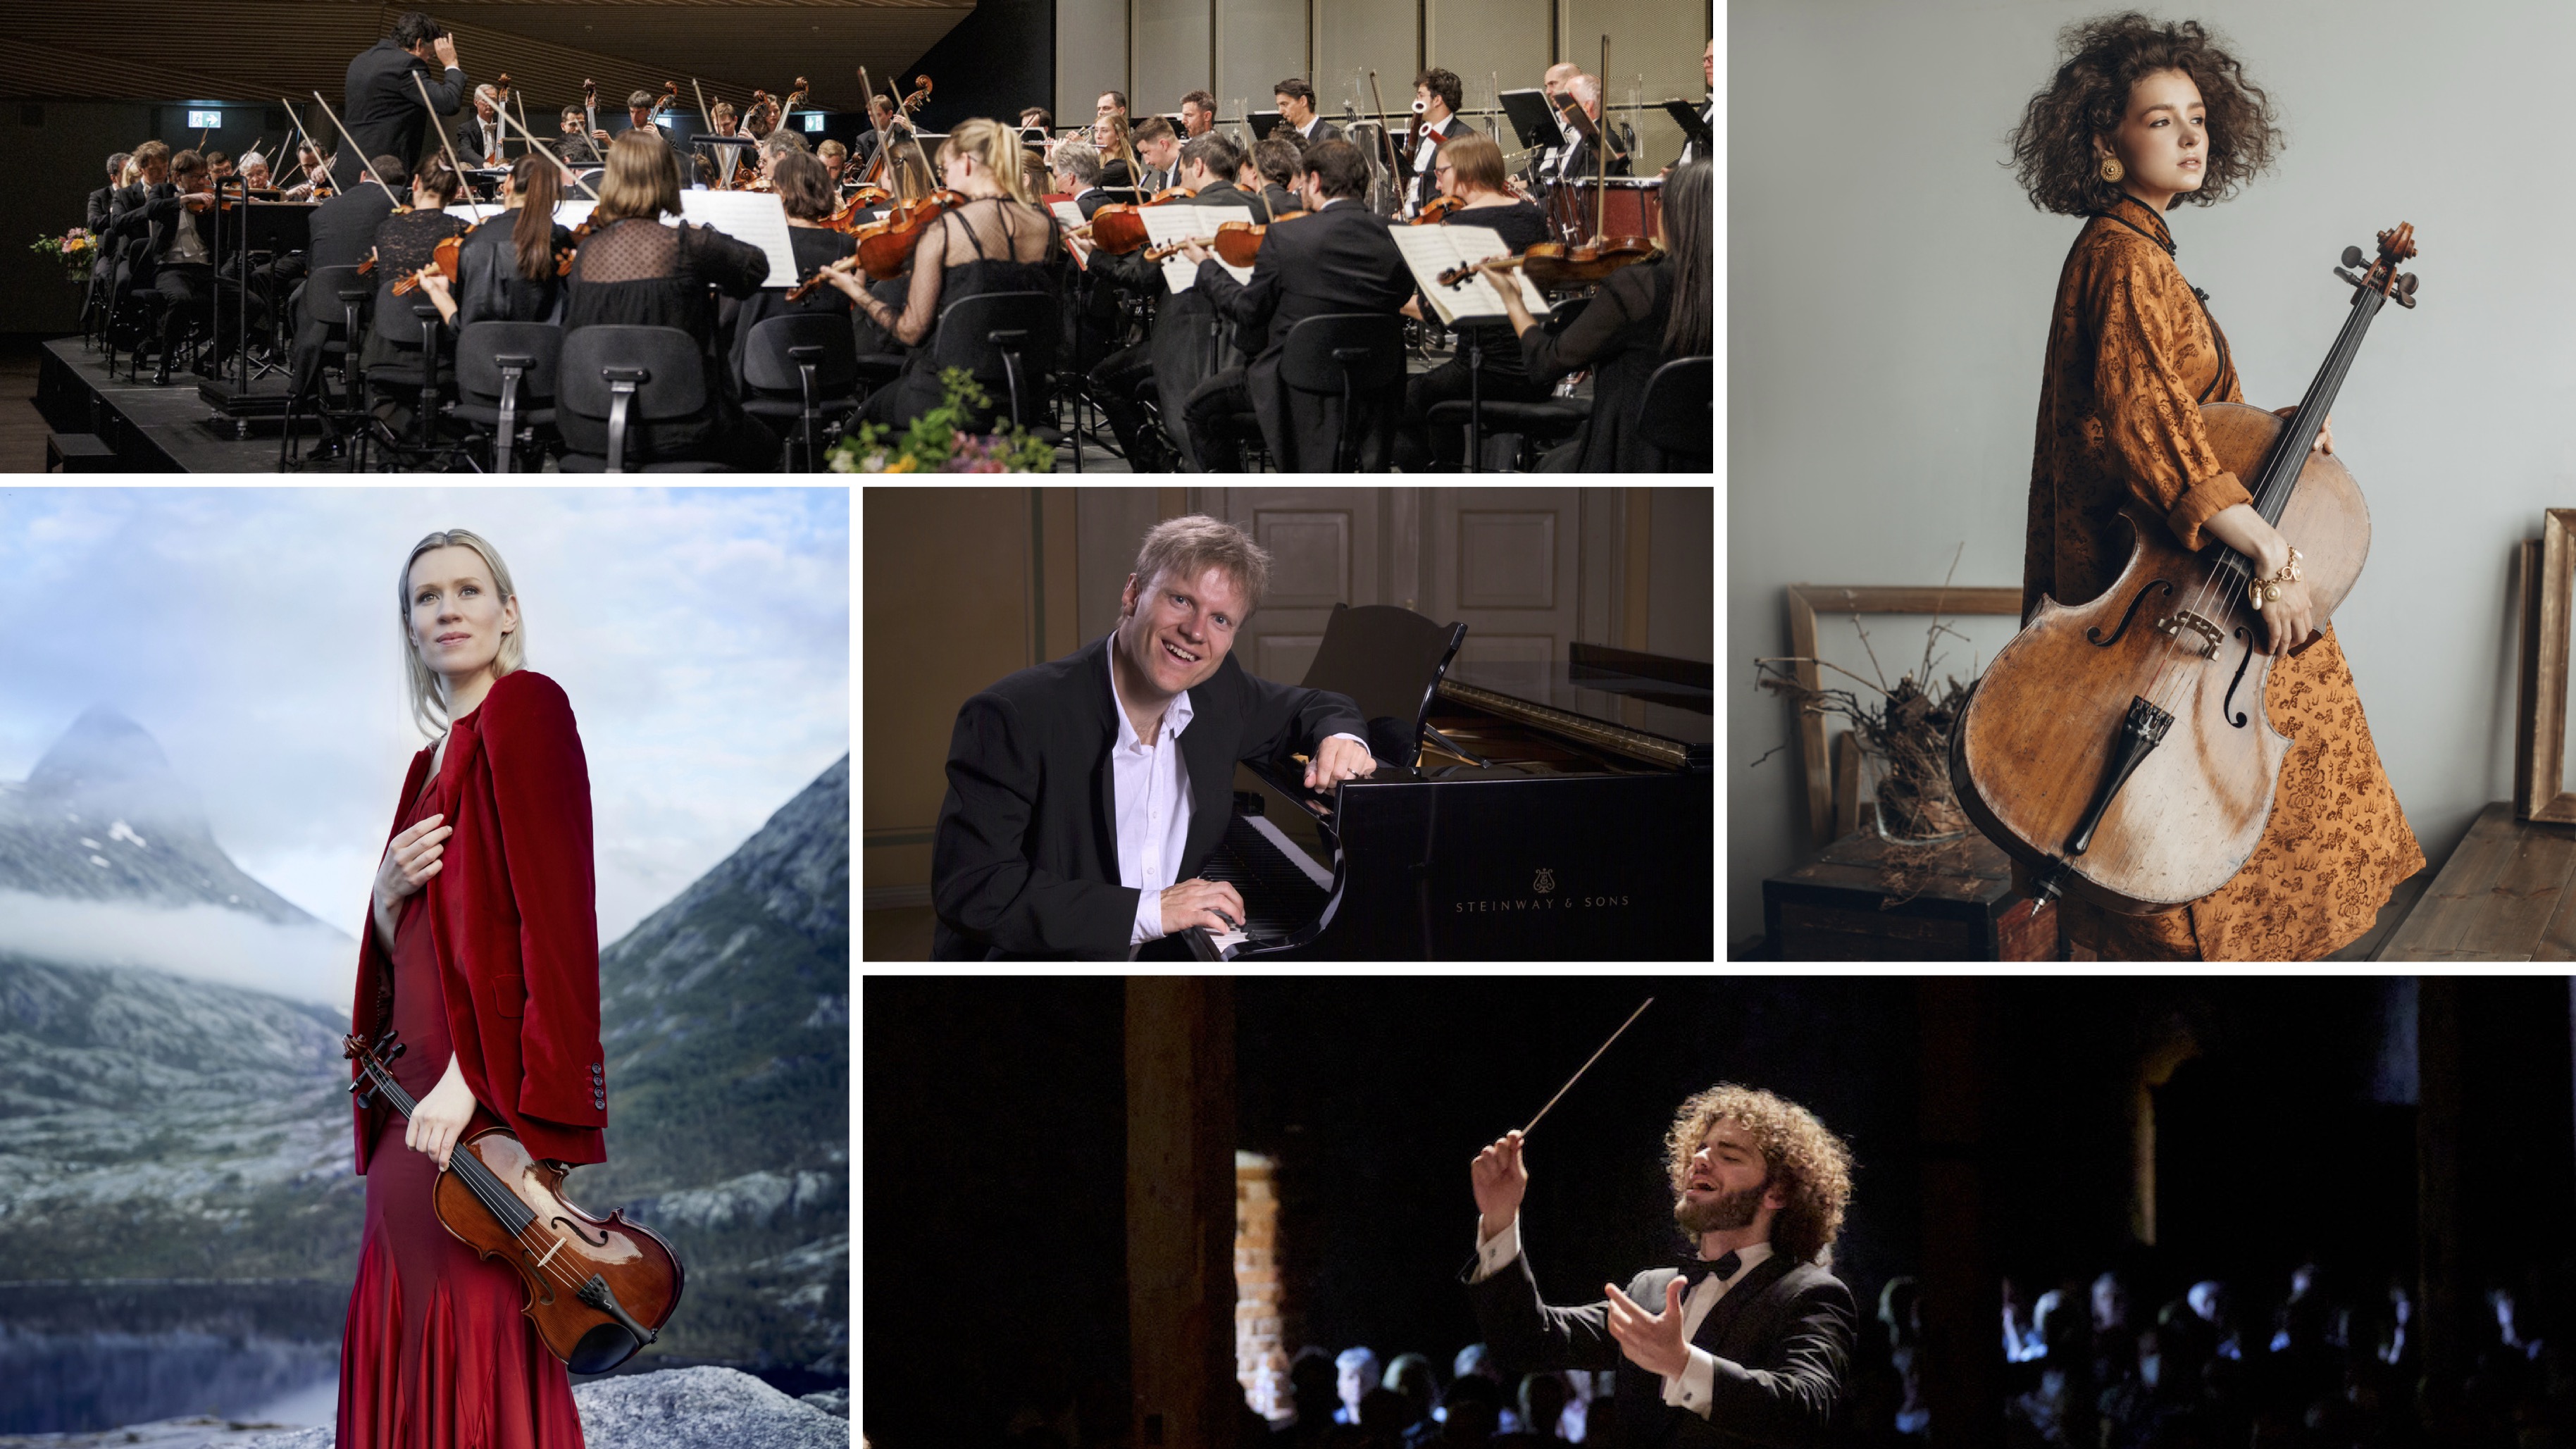 In just one week – International stars meet local high culture in the midst of the magnificent Swiss mountains